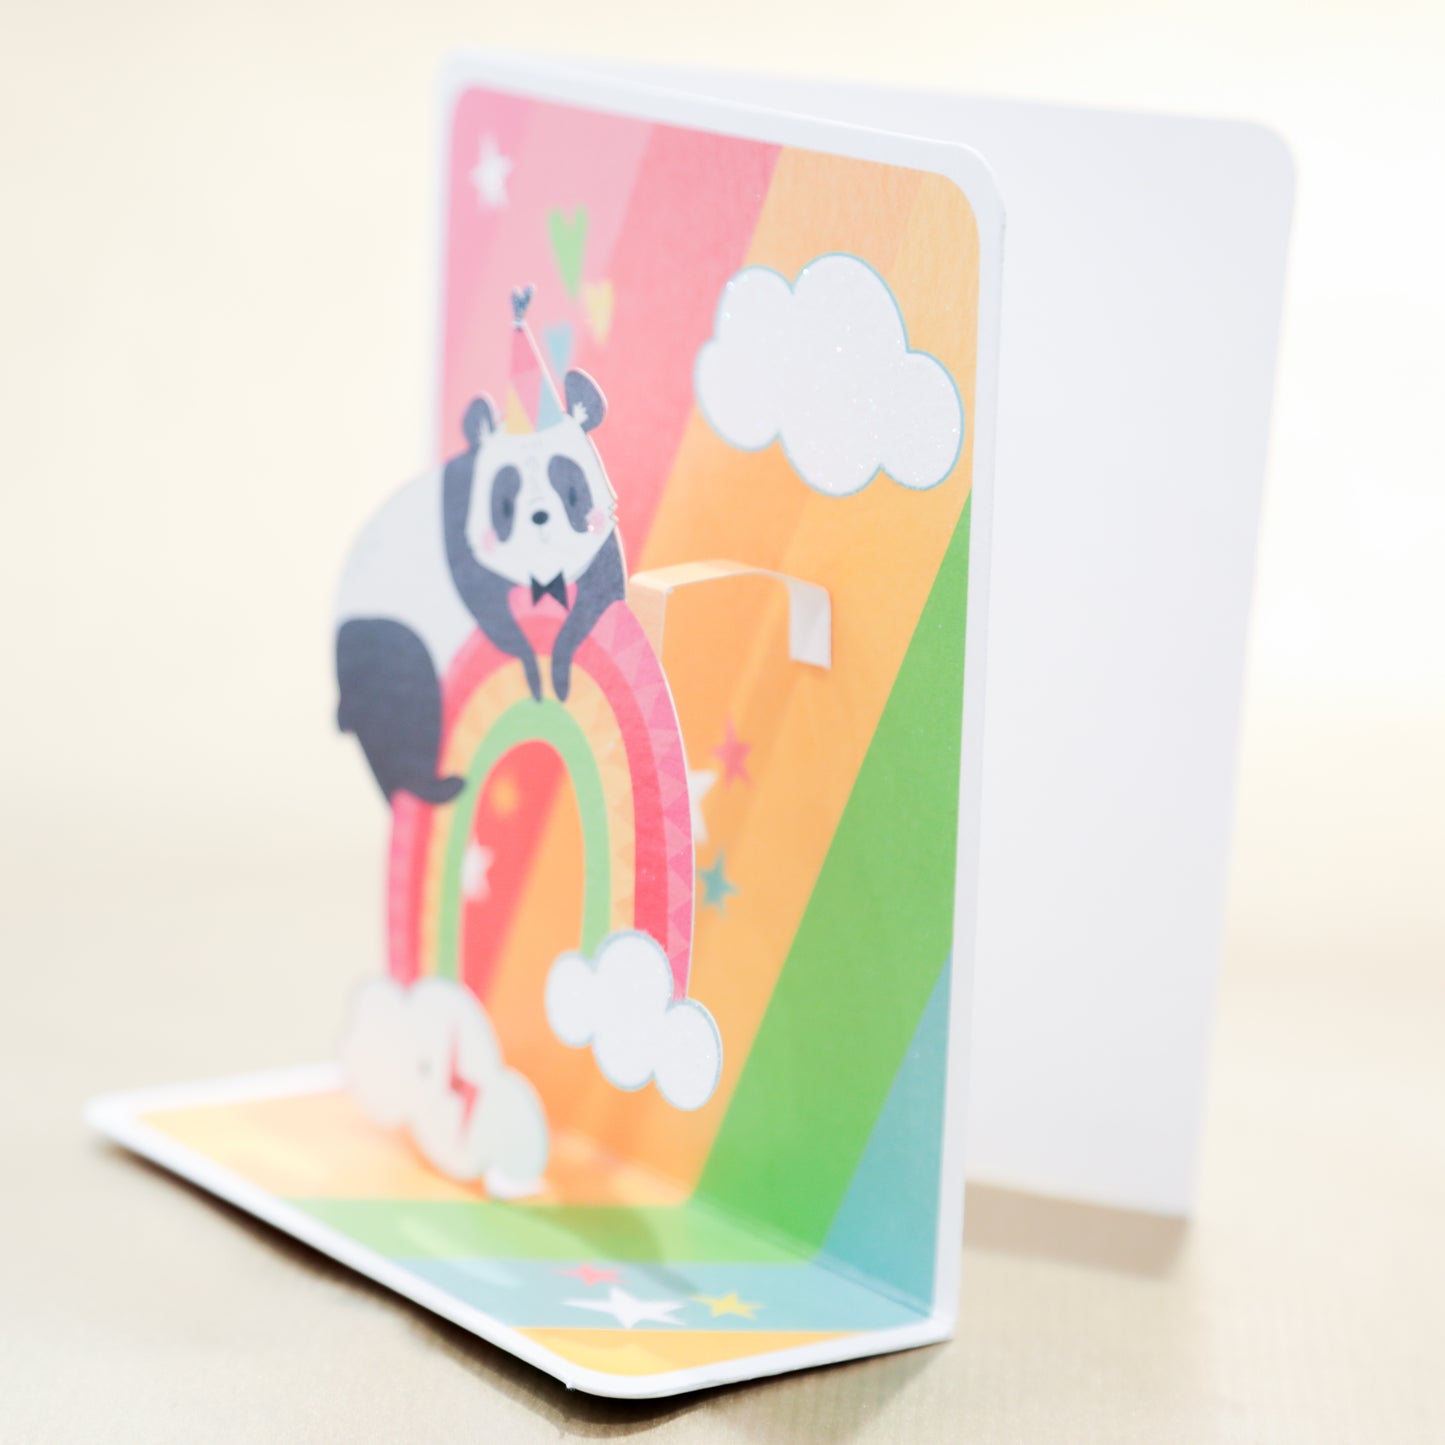 3D Greeting Card - Party Panda on a Rainbow. Children's